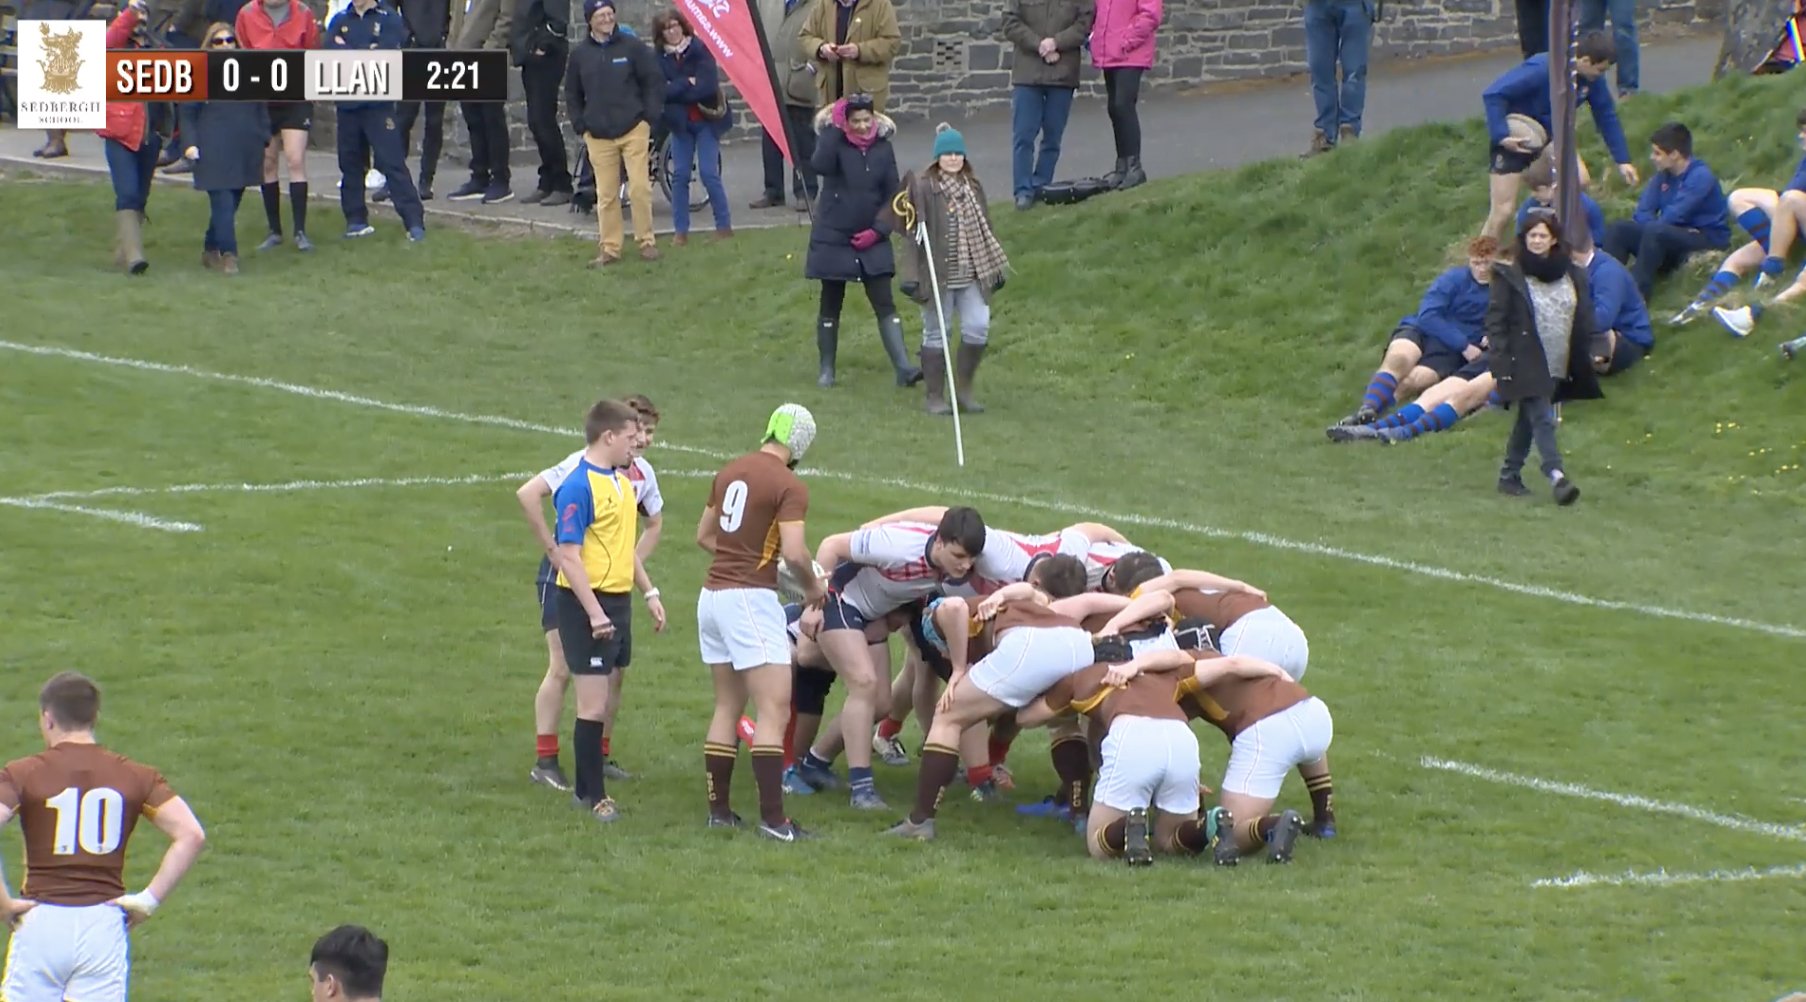 WATCH: Best rugby school in England play at terrifyingly high standard in local tournament